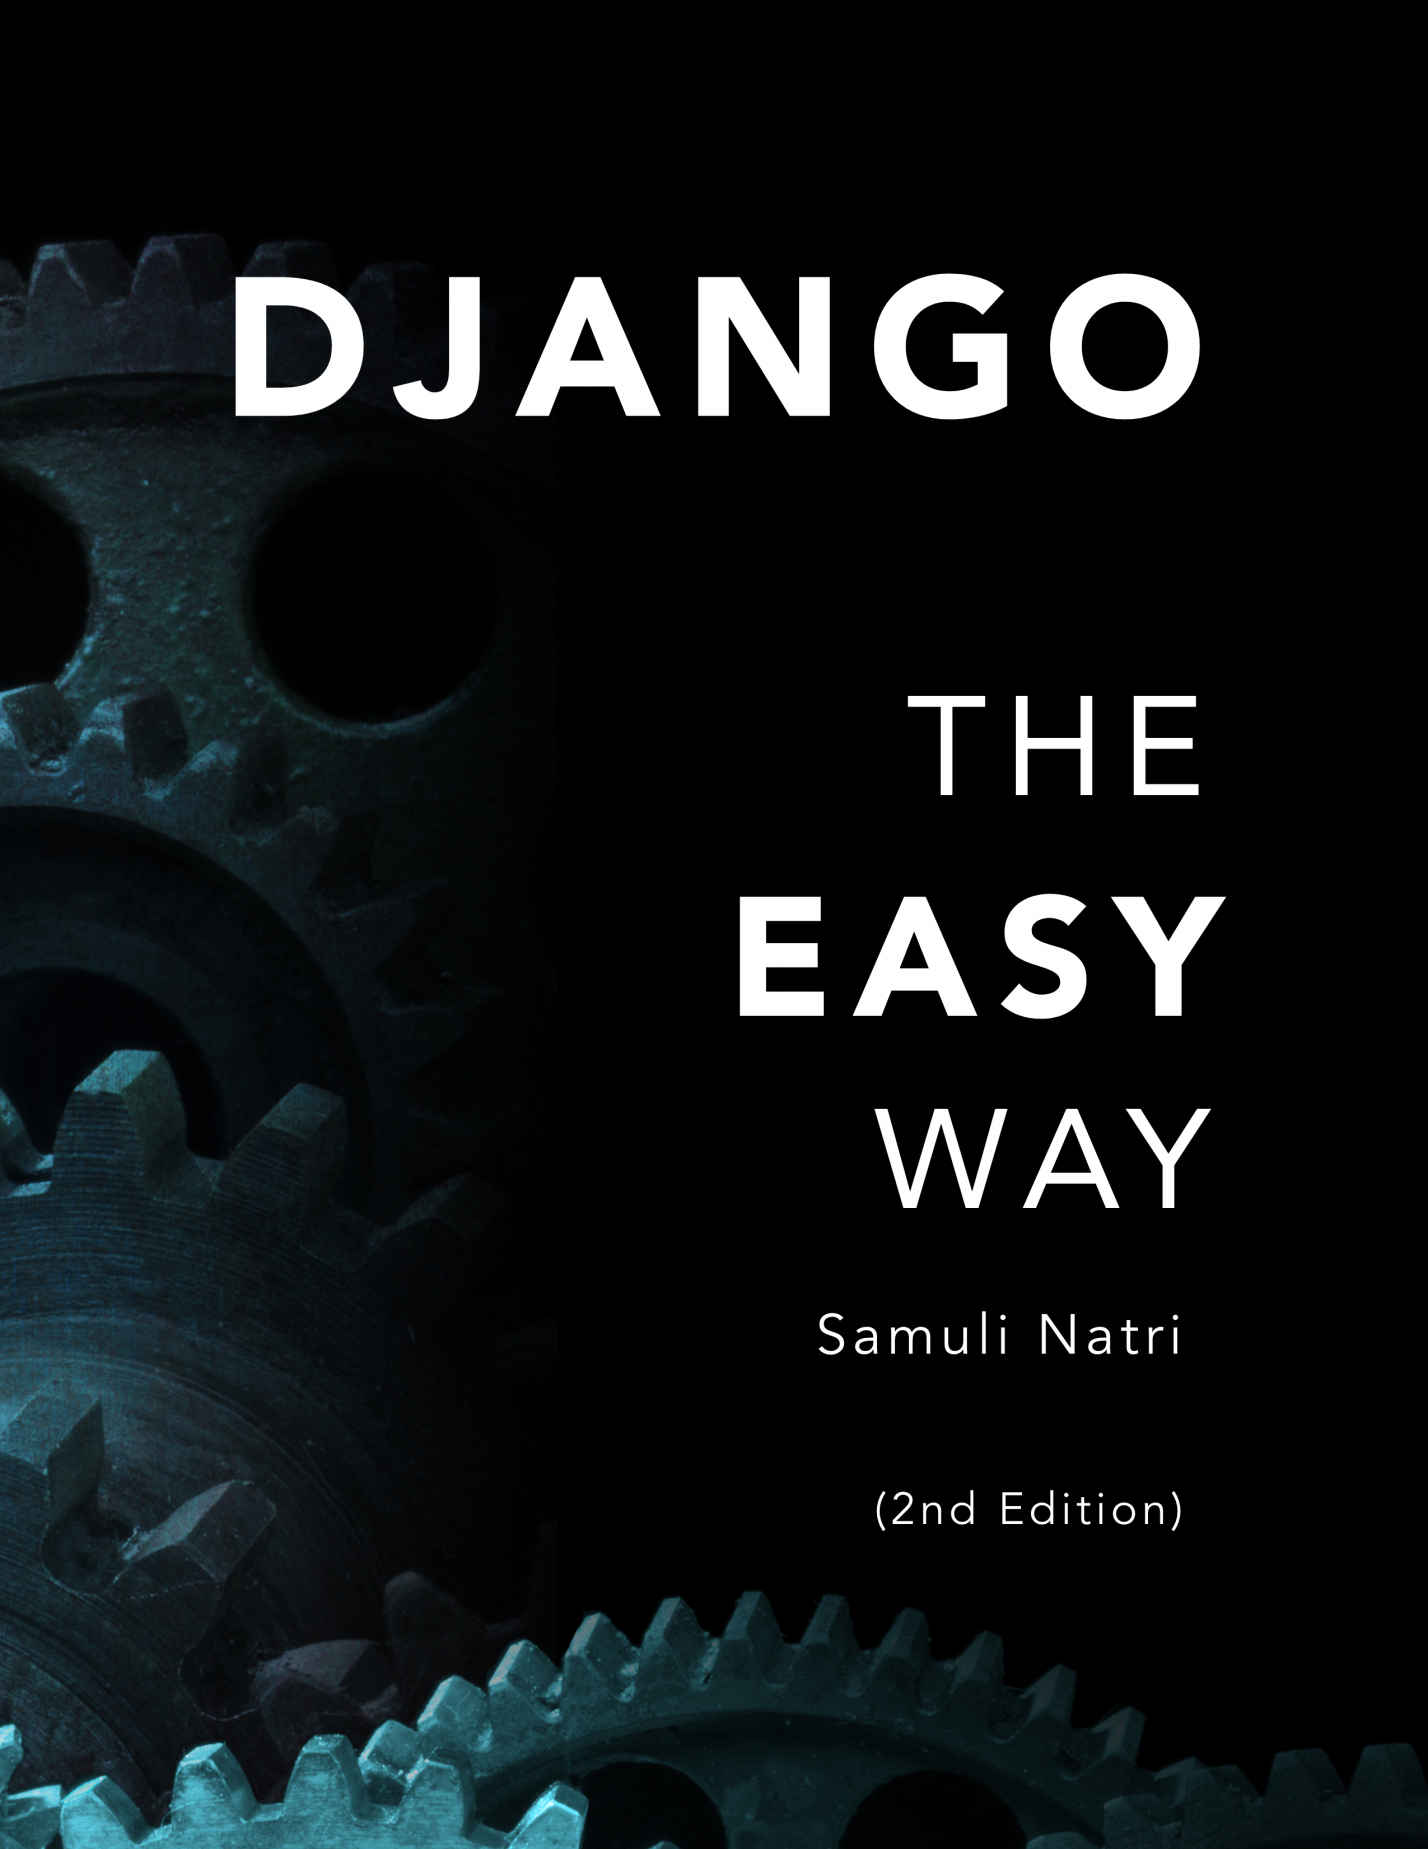 Django - The Easy Way (2nd Edition): A step-by-step guide on building Django websites